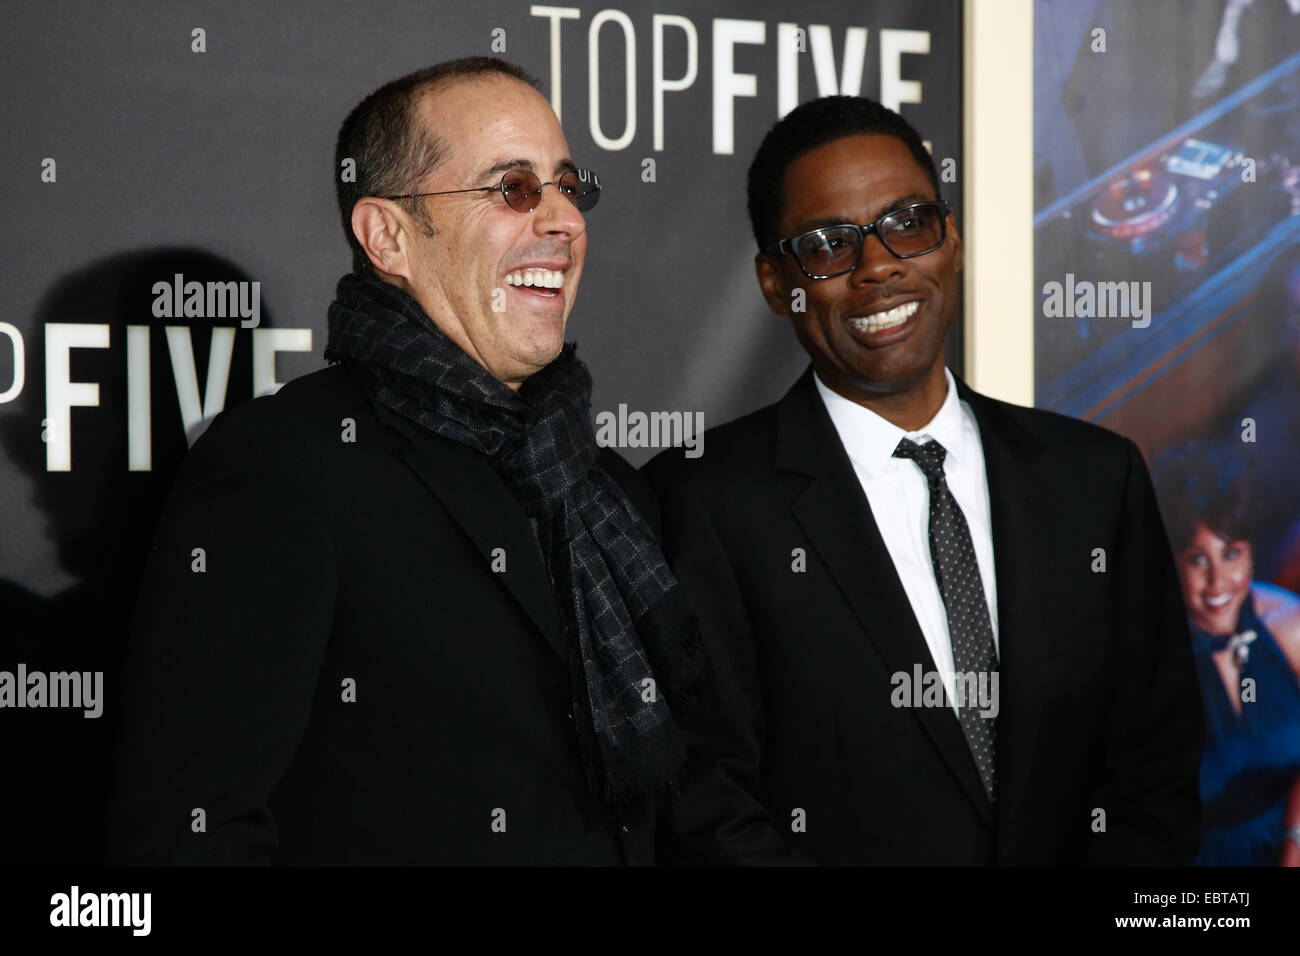 New York, USA. 3rd December, 2014. Comedian/actors Jerry Seinfeld (L) and Chris Rock attend the 'Top Five' premiere at the Ziegfeld Theatre on December 3, 2014 in New York City. Credit:  Debby Wong/Alamy Live News Stock Photo